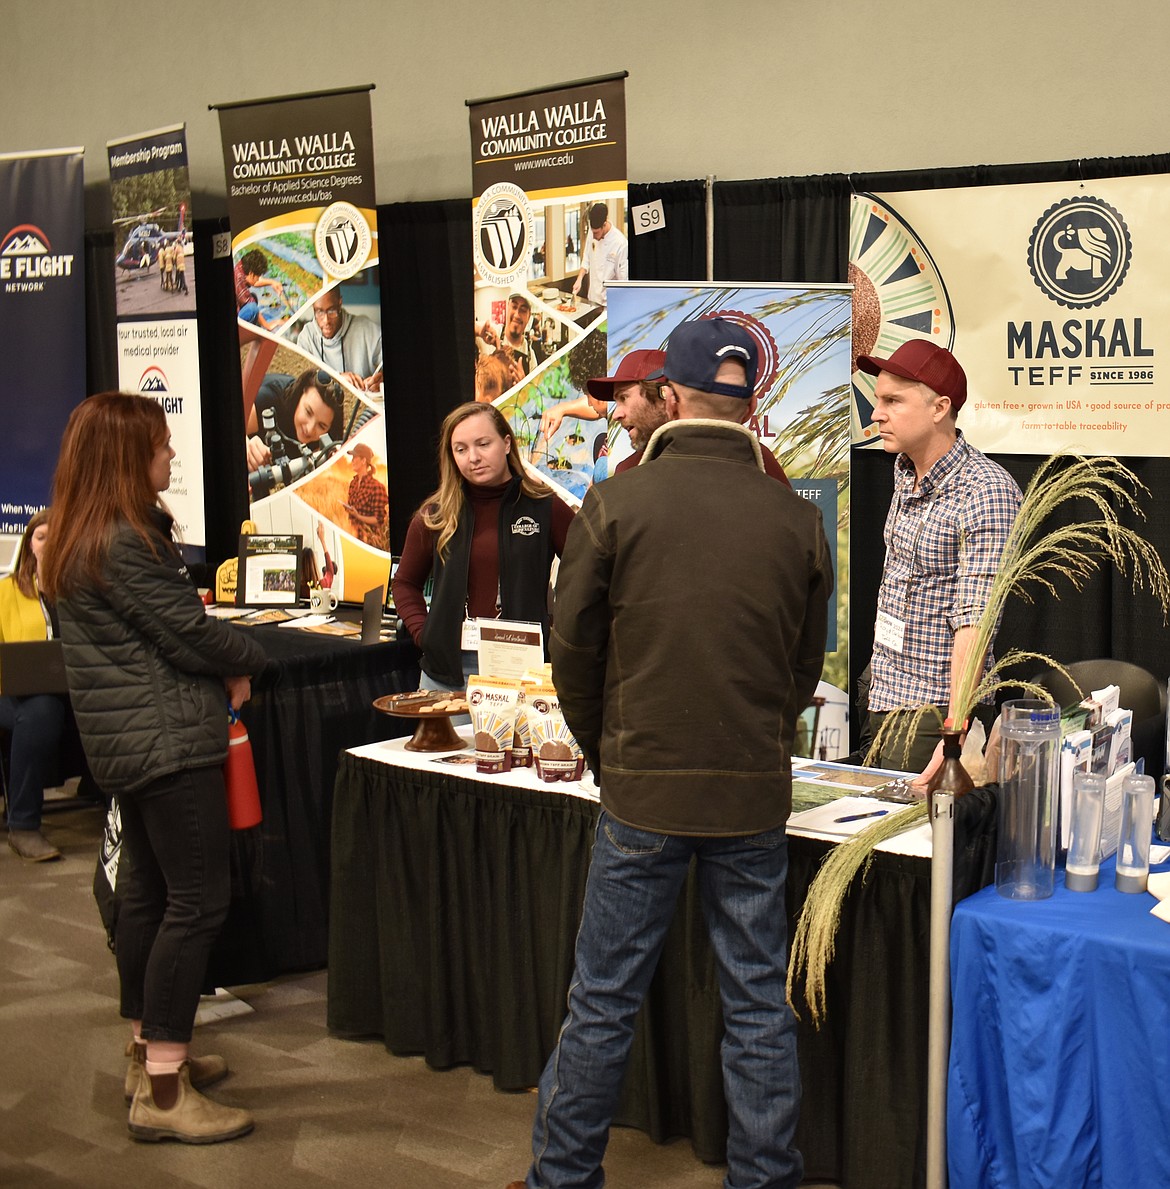 Representatives from The Teff Company discuss the Ethiopian grain with attendees at the Spokane Ag Show Feb. 7.